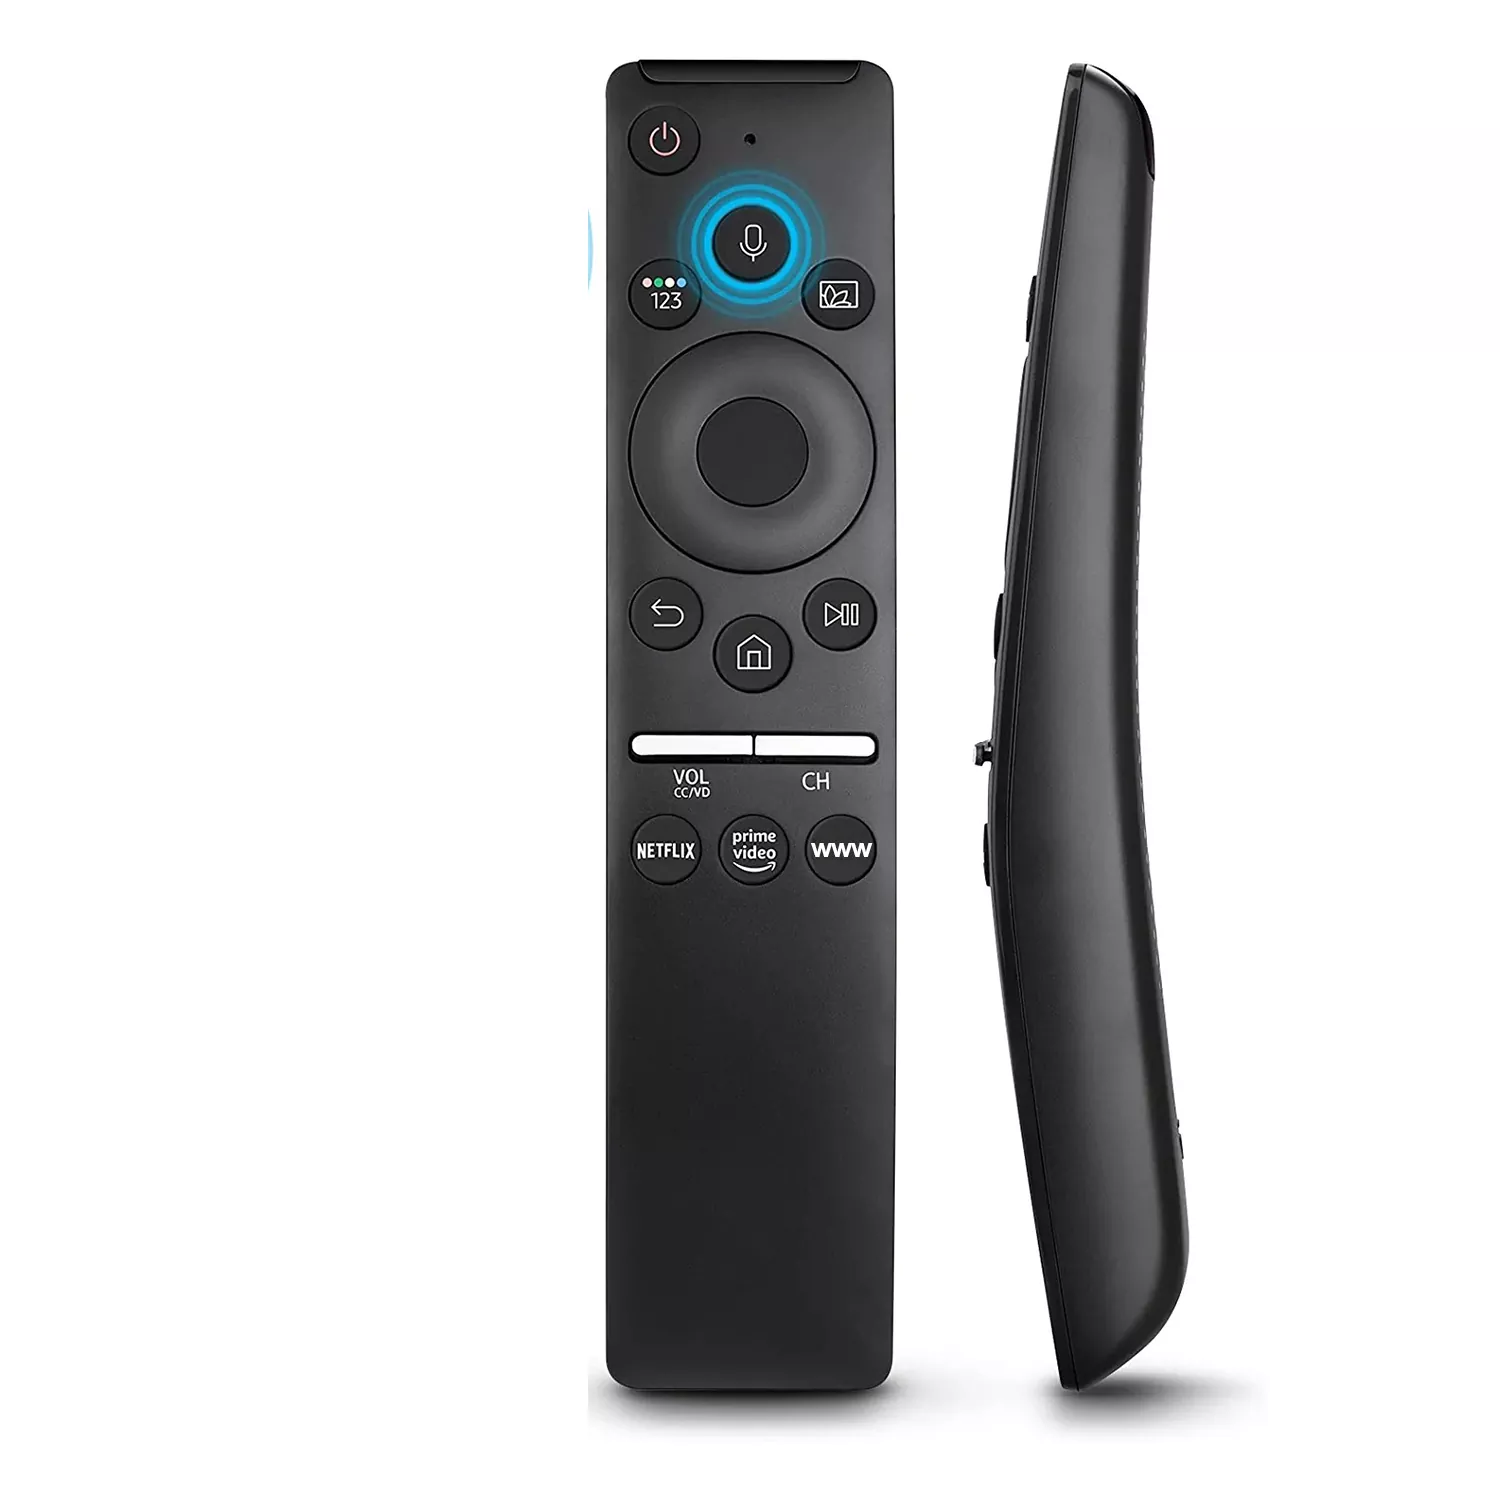 Additional options in handling Tizen TV remote key events